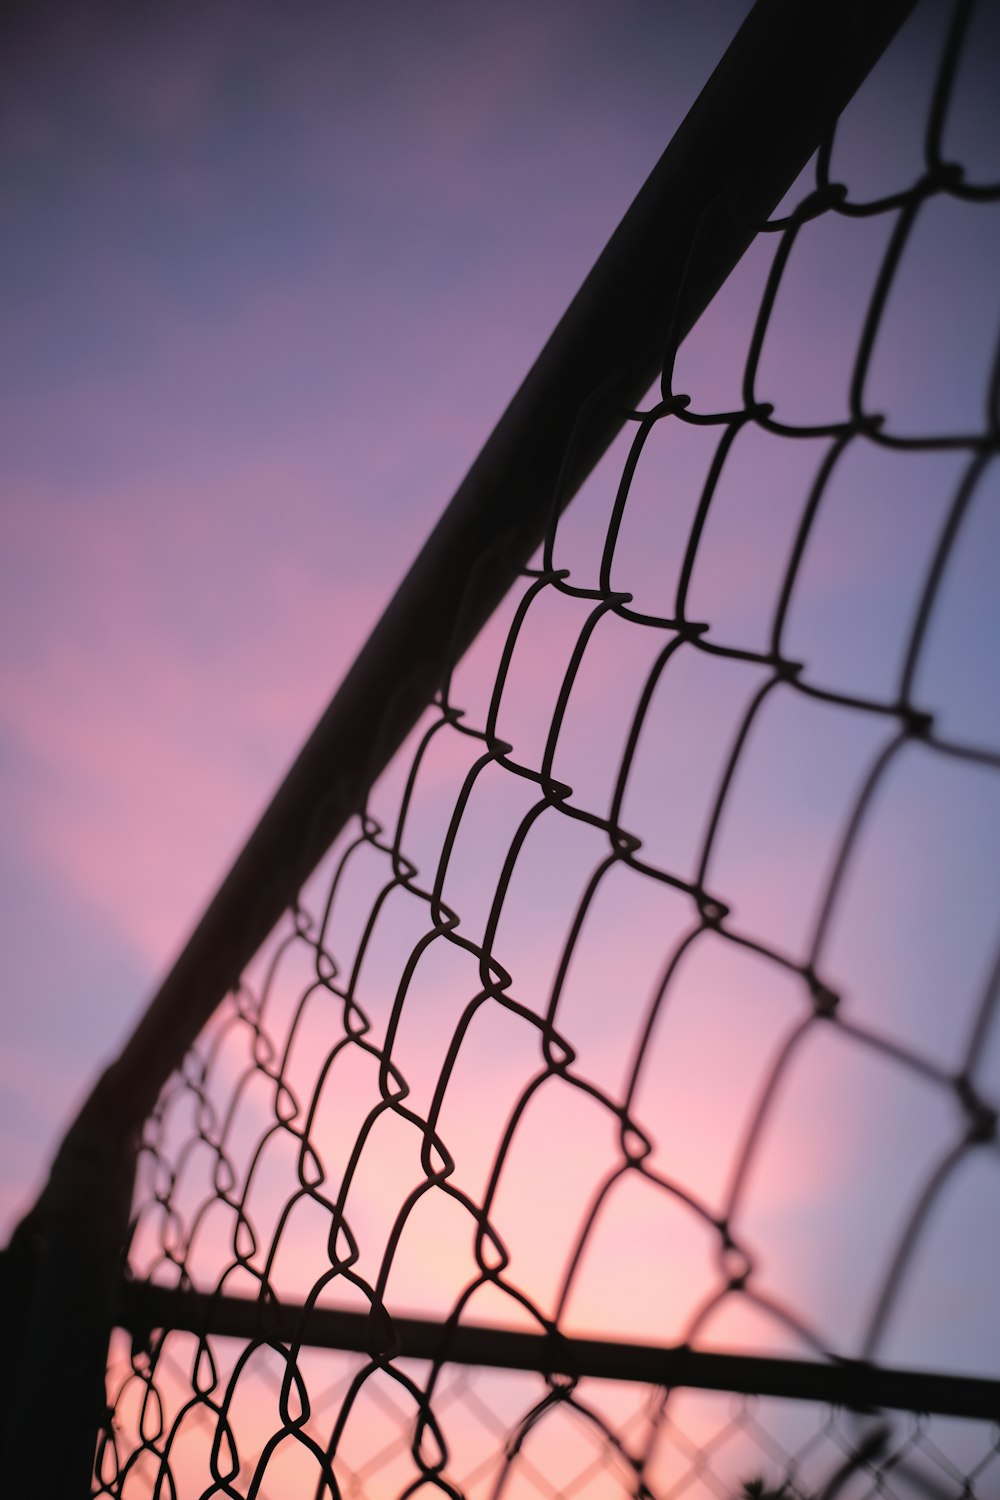 a chain link fence with a sunset in the background